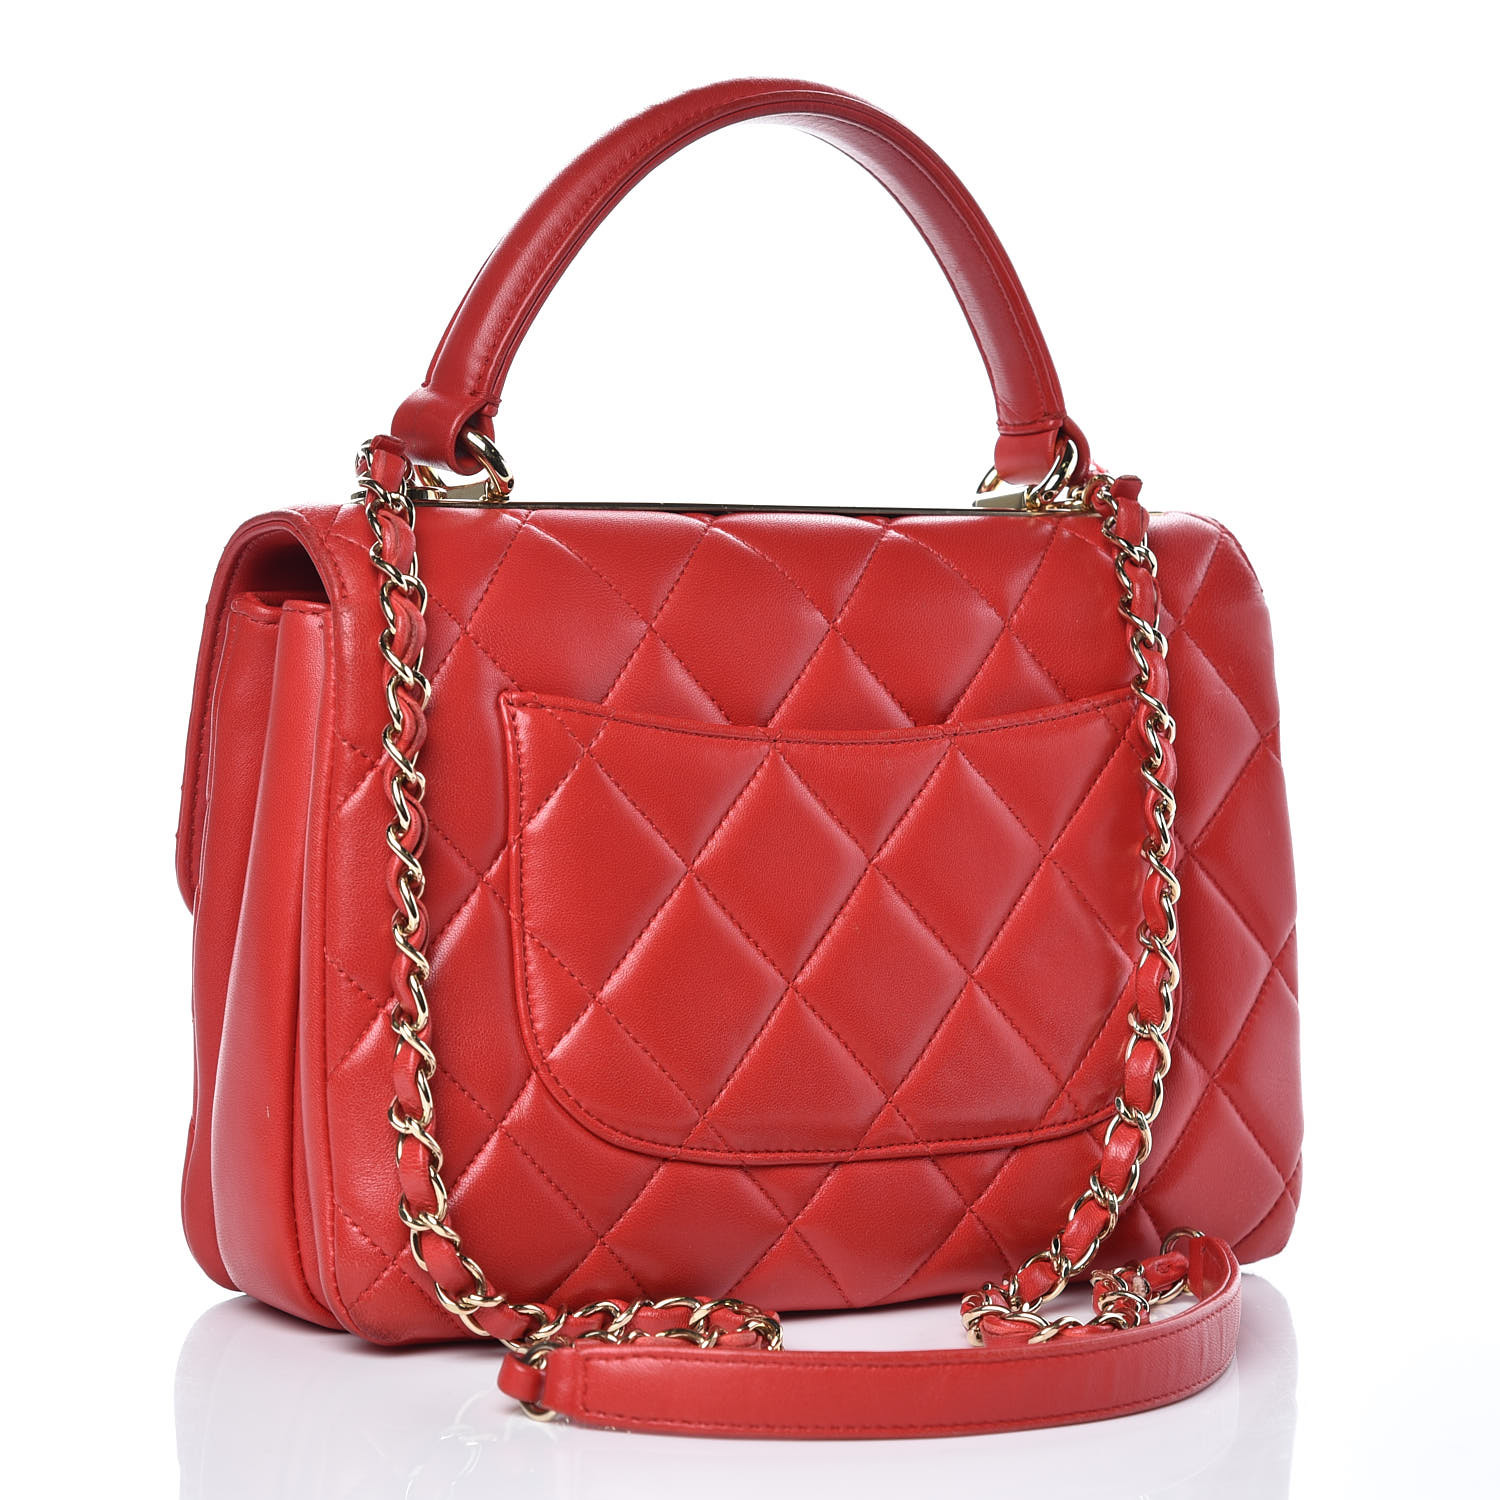 CHANEL Lambskin Quilted Small Trendy CC Dual Handle Bag Red 352381